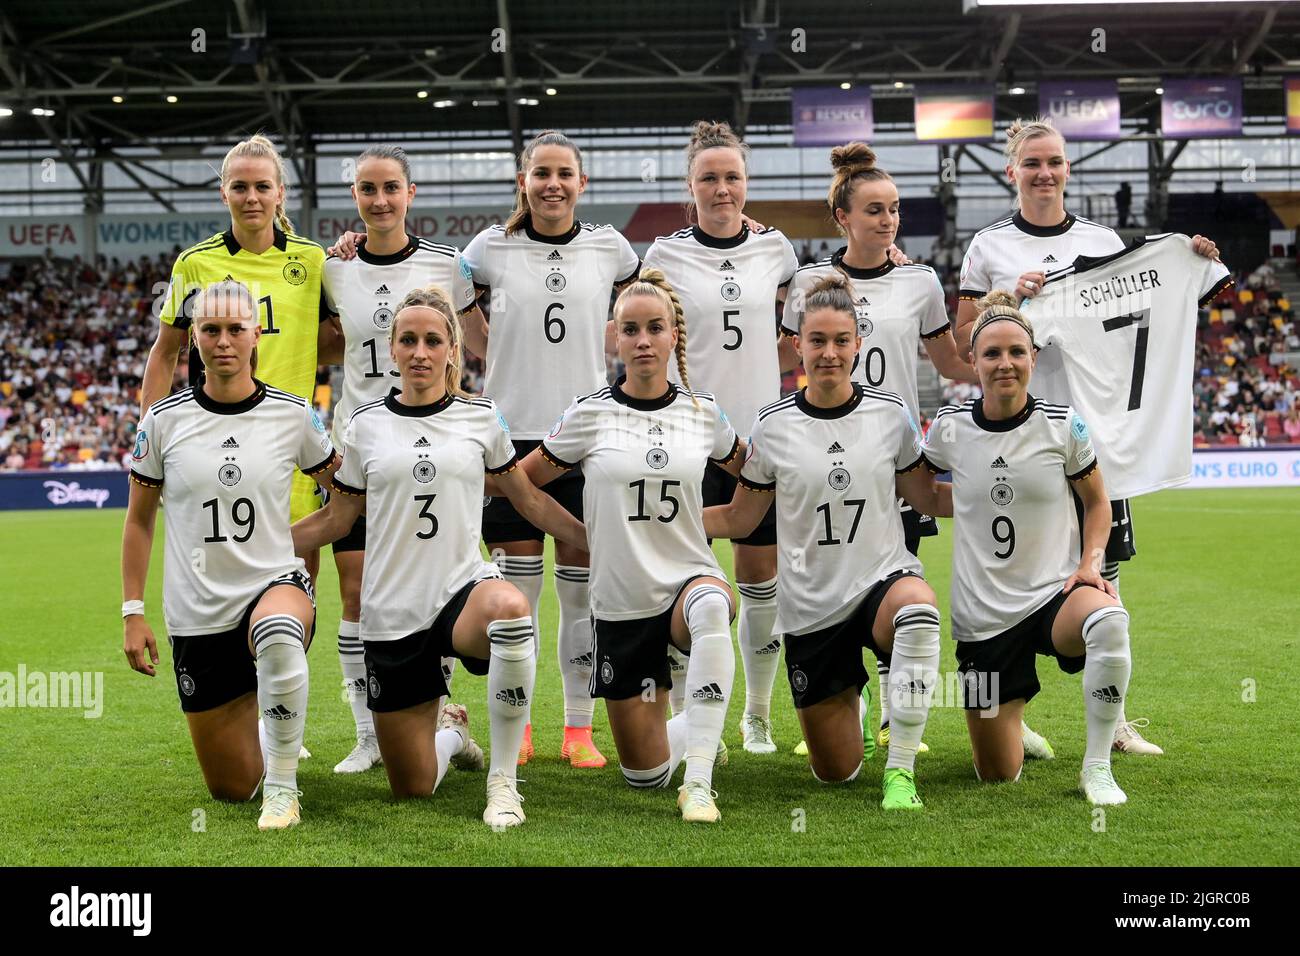 12 July 2022, Great Britain, Brentford/ London: Soccer, Women: European Championship, Germany - Spain, Preliminary Round, Group B, Matchday 2, Brentford Community Stadium. Germany's players lined up for a team photo before the match. (bottom from left) Klara Bühl, Kathrin Hendrich, Giulia Gwinn, Felicitas Rauch, Svenja Huth (top from left) goalkeeper Merle Frohms, Sara Däbritz, Lena Sophie Oberdorf, Marina Hegering, Lina Magull, Alexandra Popp. Popp is holding the jersey of Germany's Lea Schüller, who is missing from the spiuel due to a positive coronatest. Photo: Sebastian Christoph Gollnow/d Stock Photo